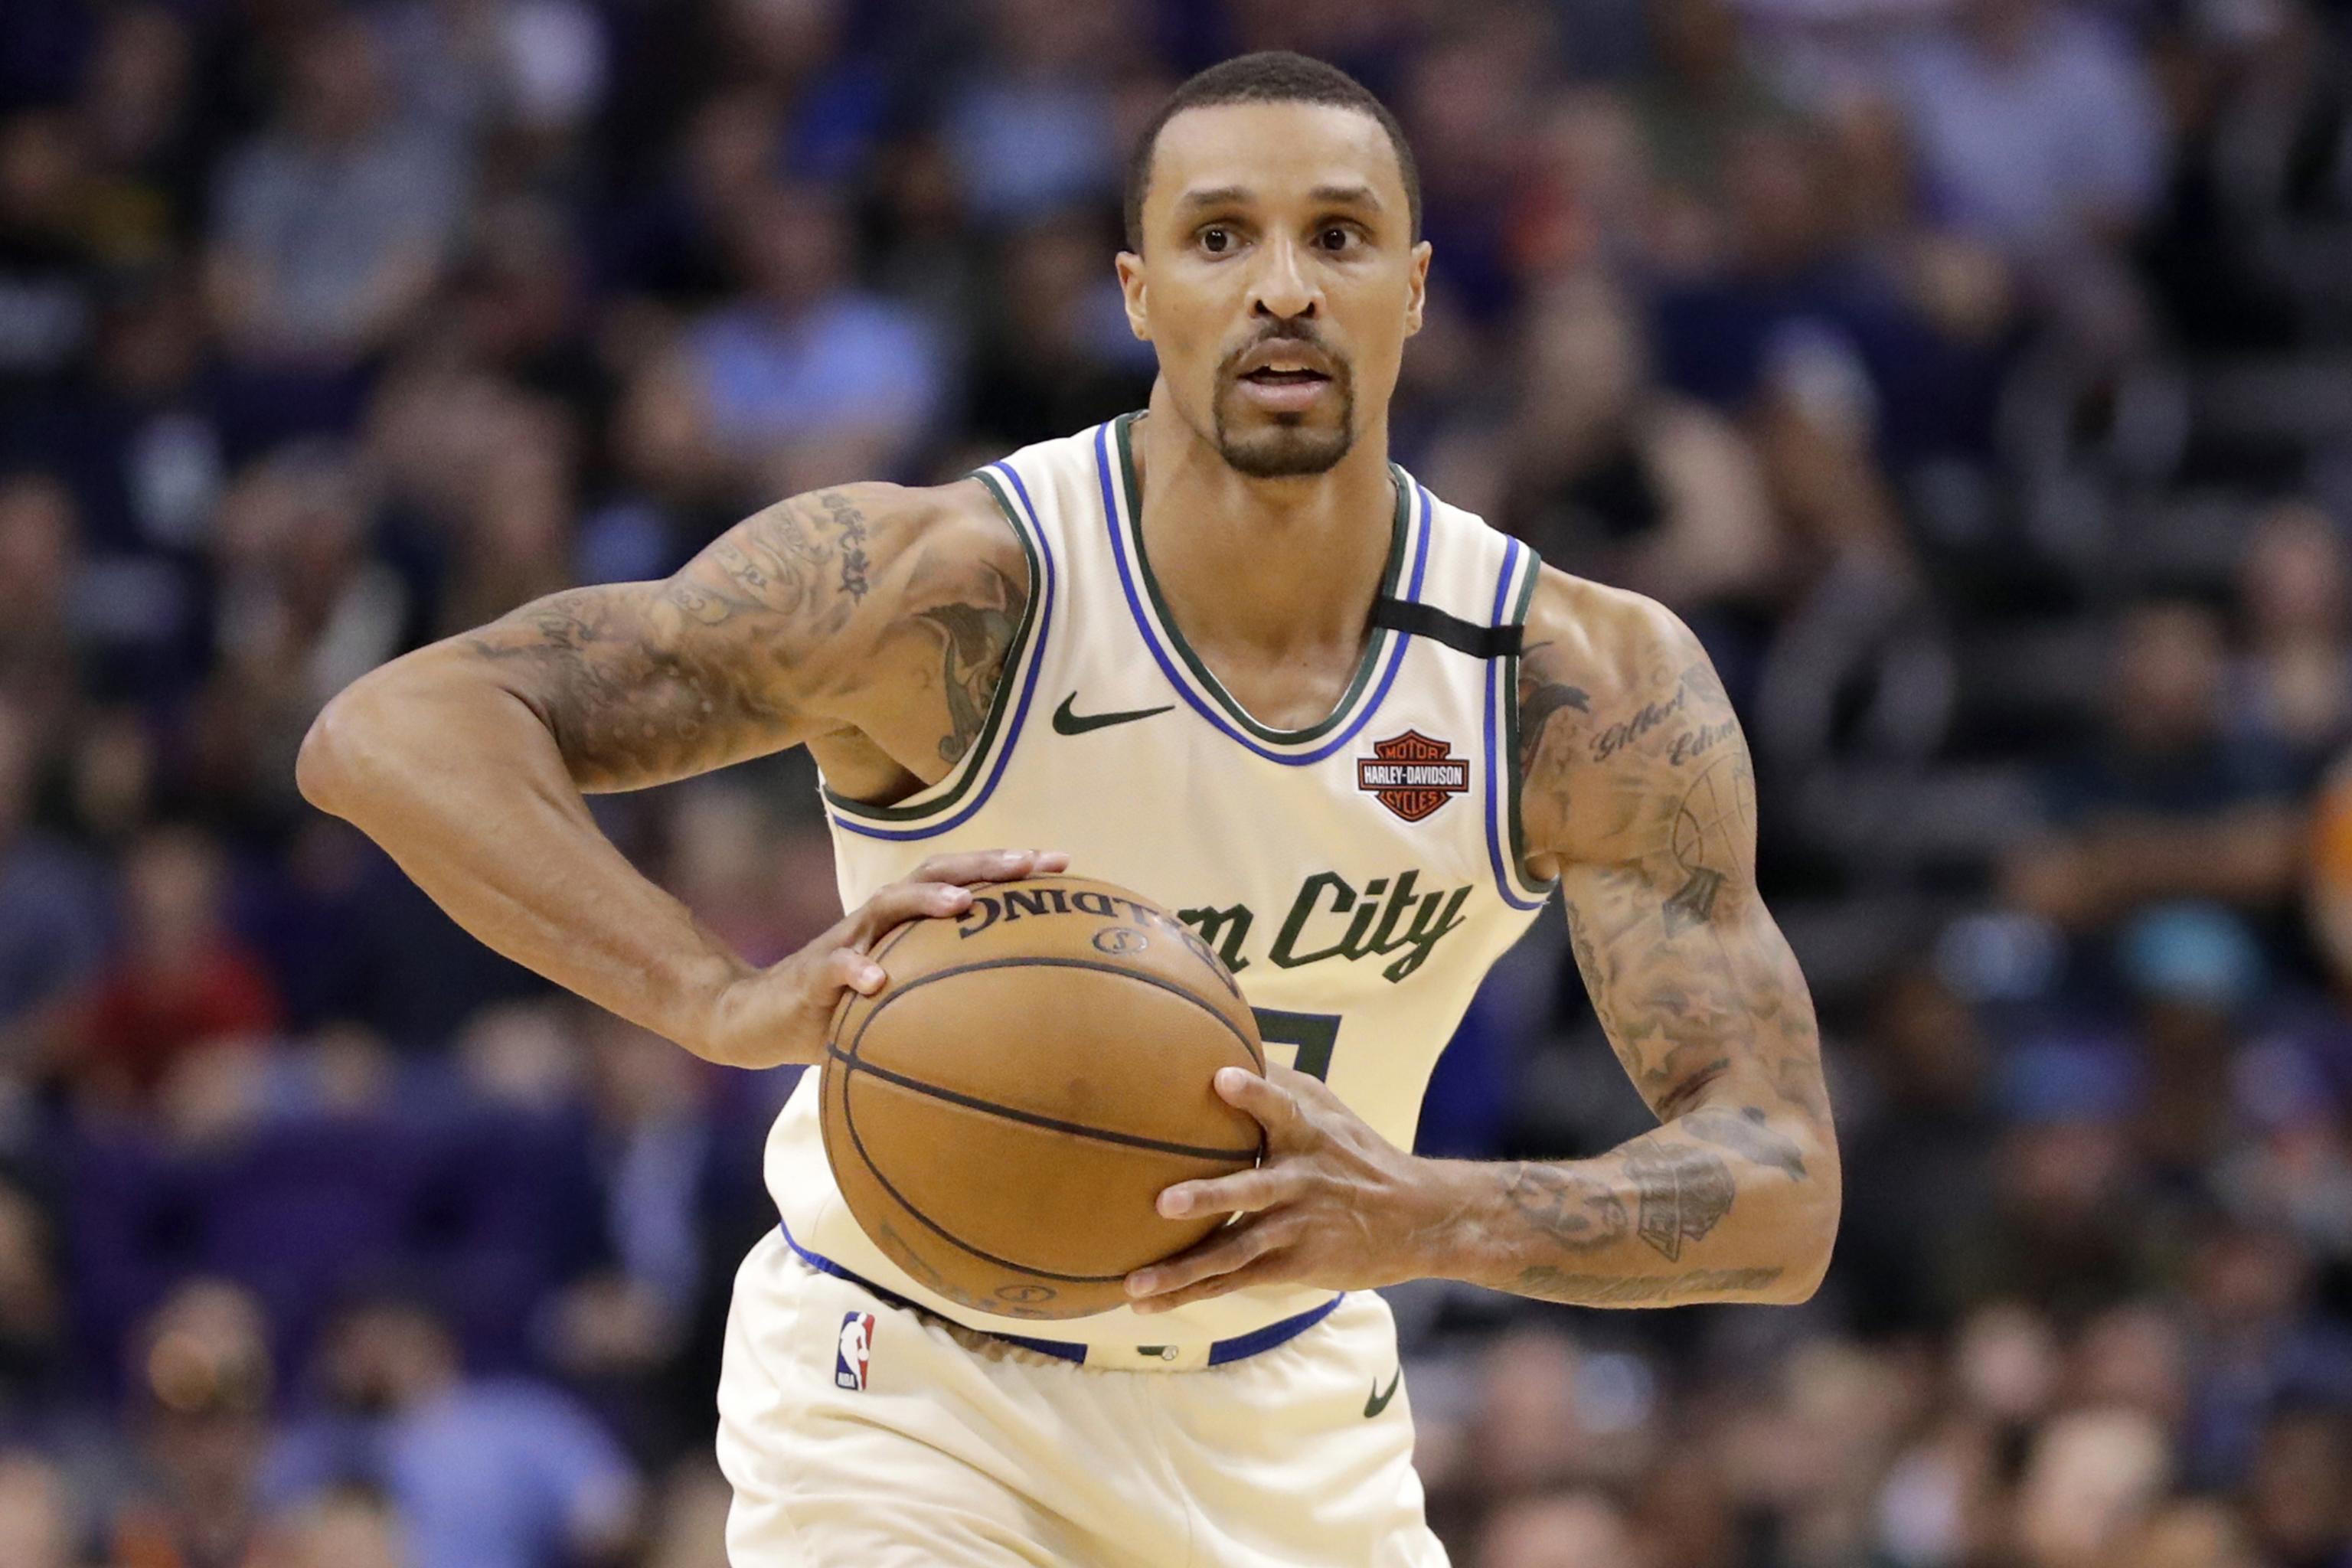 George Hill on Shooting of Jacob Blake: 'We Shouldn't Have Even